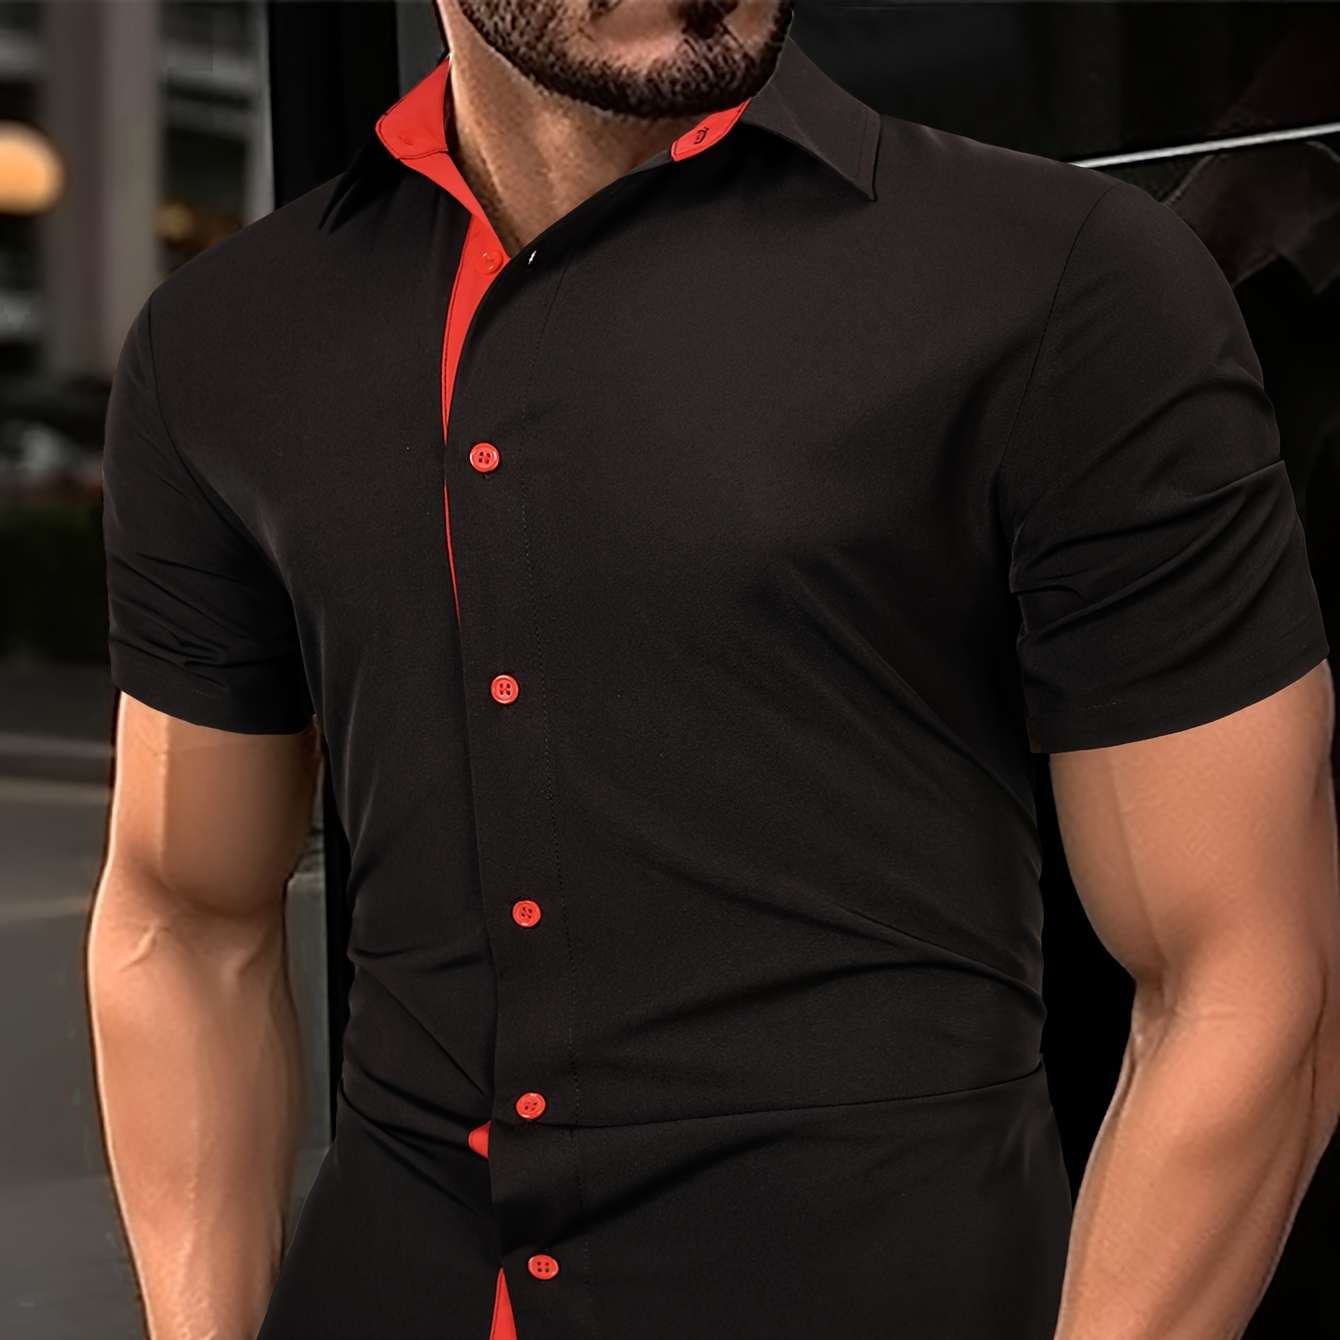 

Men's Summer Fashionable And Simple Short Sleeve Button Casual Lapel Shirt, Trendy And Versatile, Suitable For Dates, Beach Holiday, As Gifts